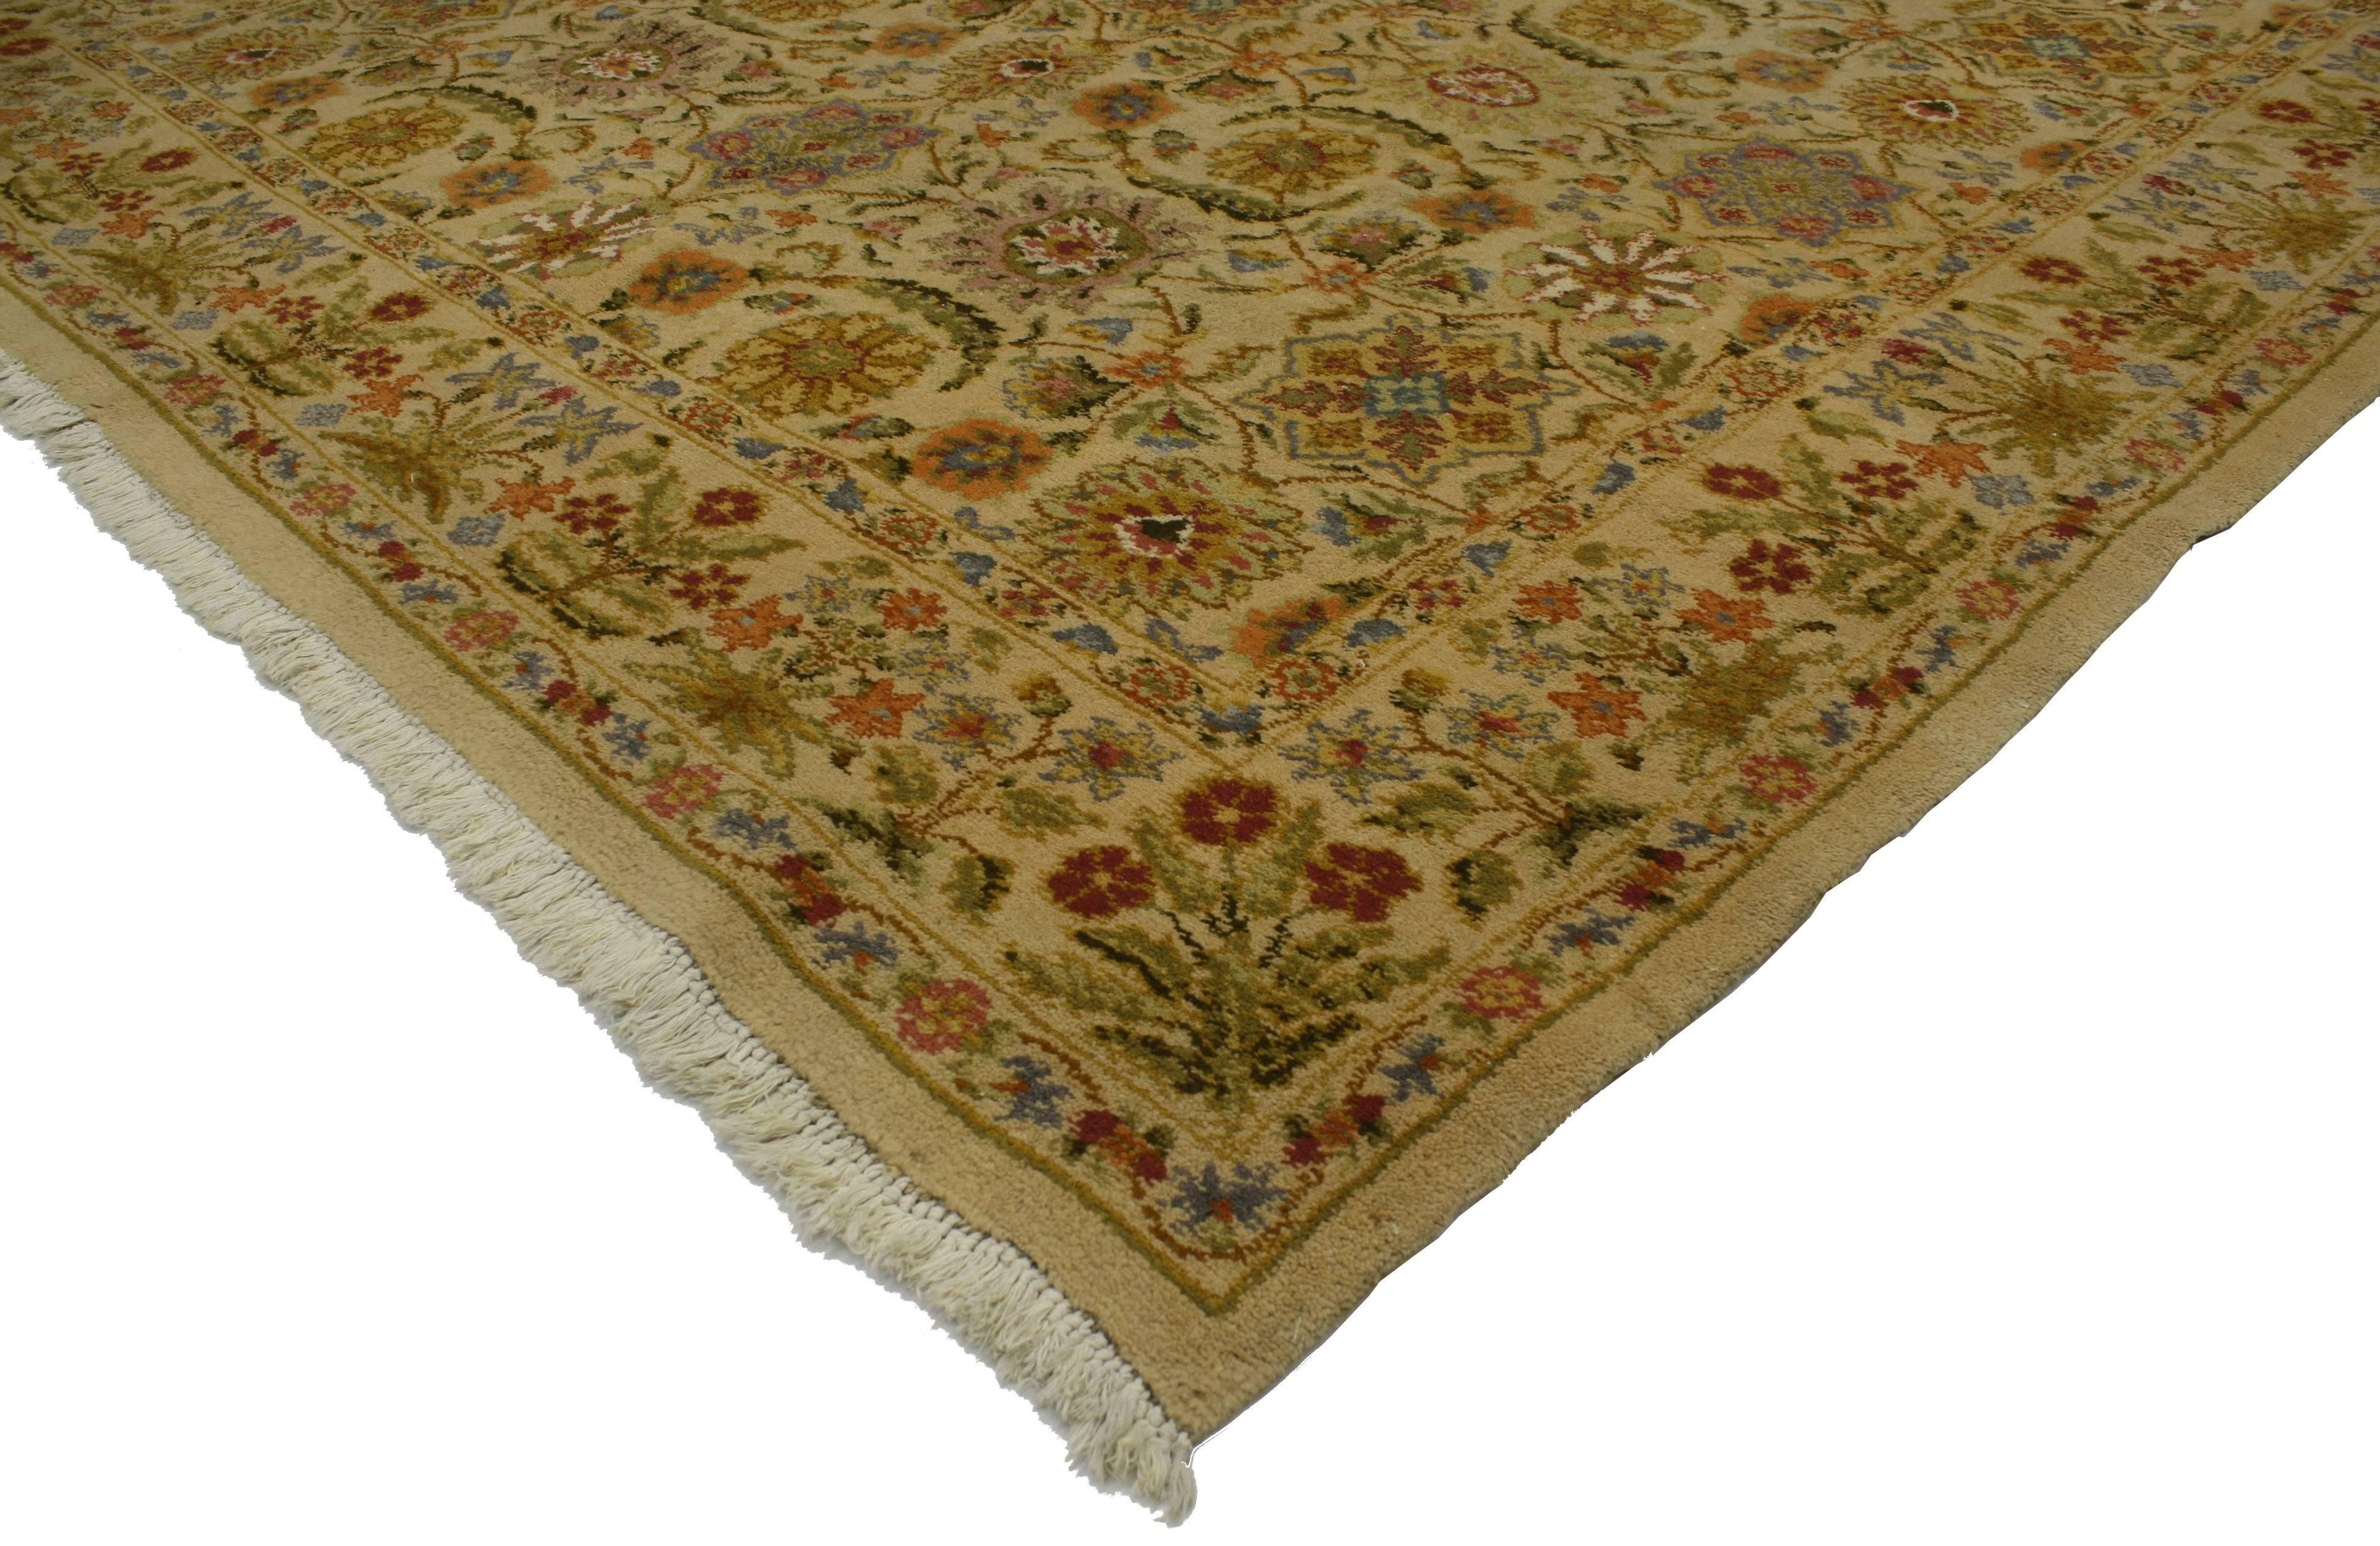 This vintage Spanish golden color rug features a modern traditional style. Displaying an allover floral and botanical pattern surrounded by a complementary border. Made in the mid-20th century, this vintage Spanish rug can be a wonderful complement